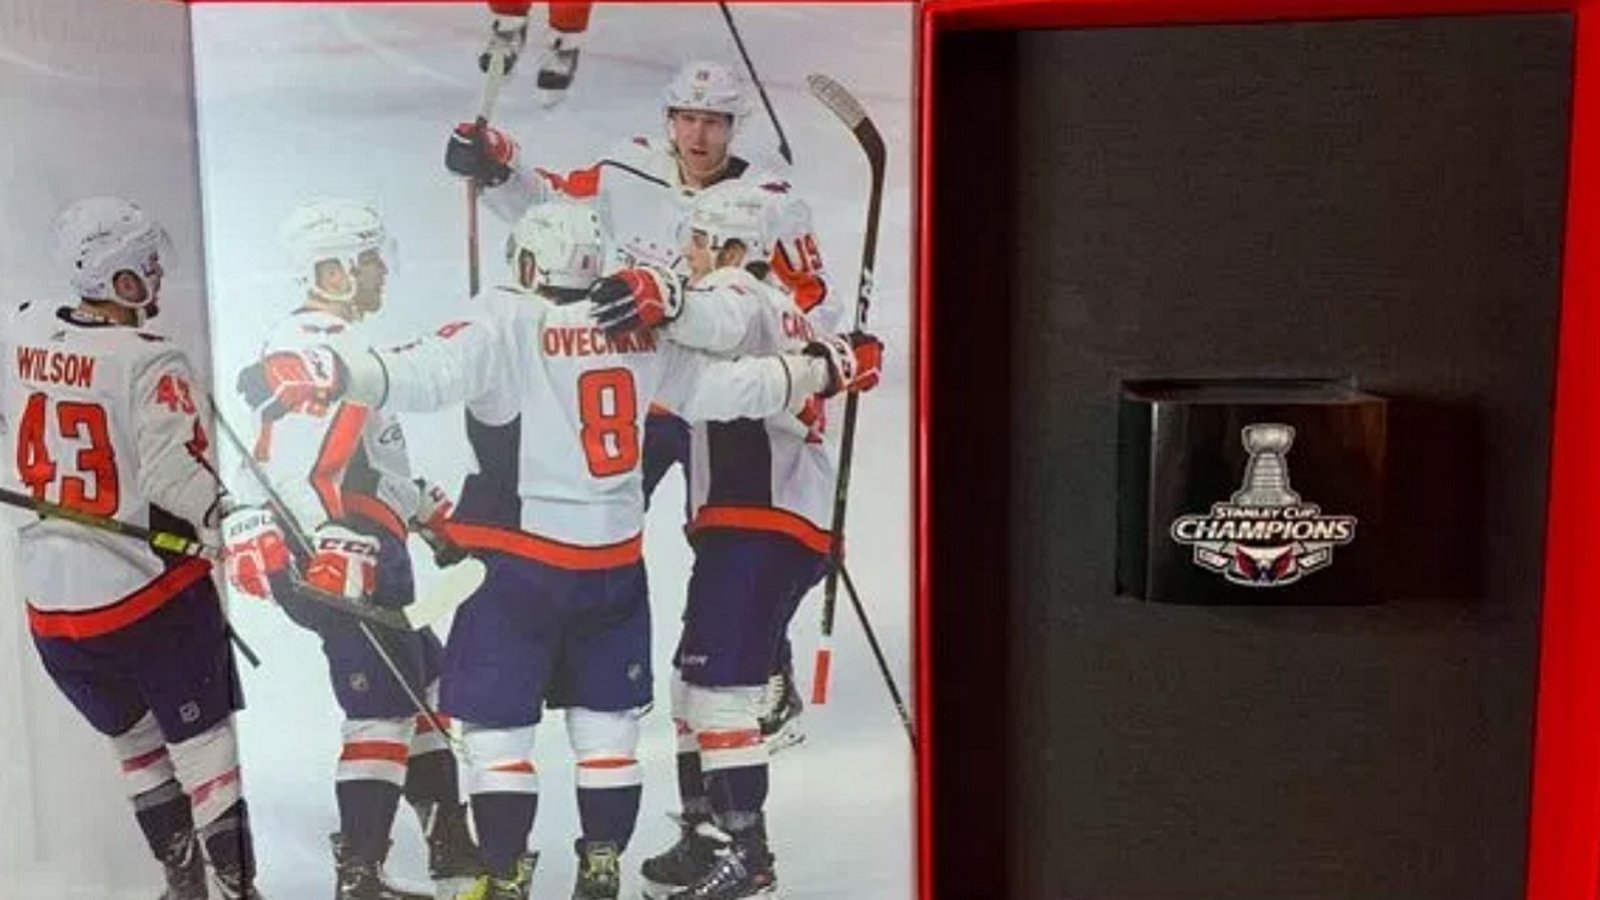 Capitals season ticket holders get unbelievable gift from the team!